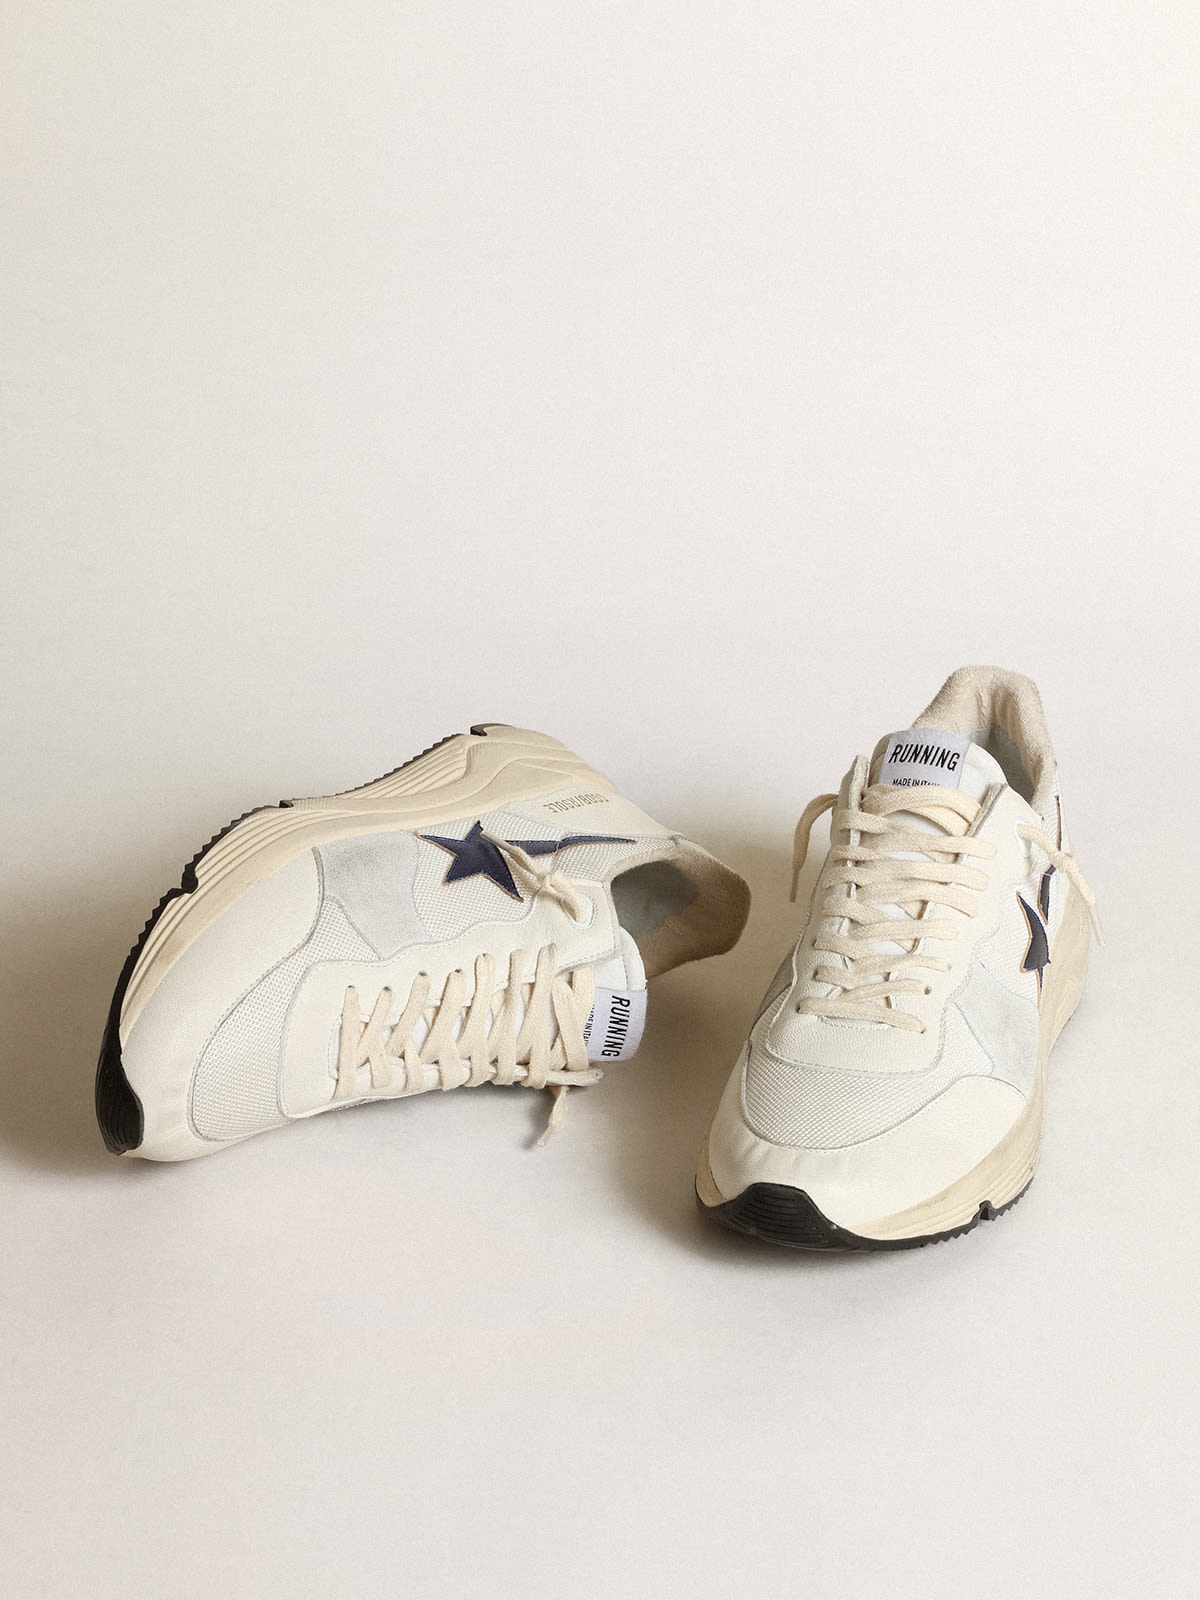 Running Sole in white mesh and nappa leather with a blue star - 2